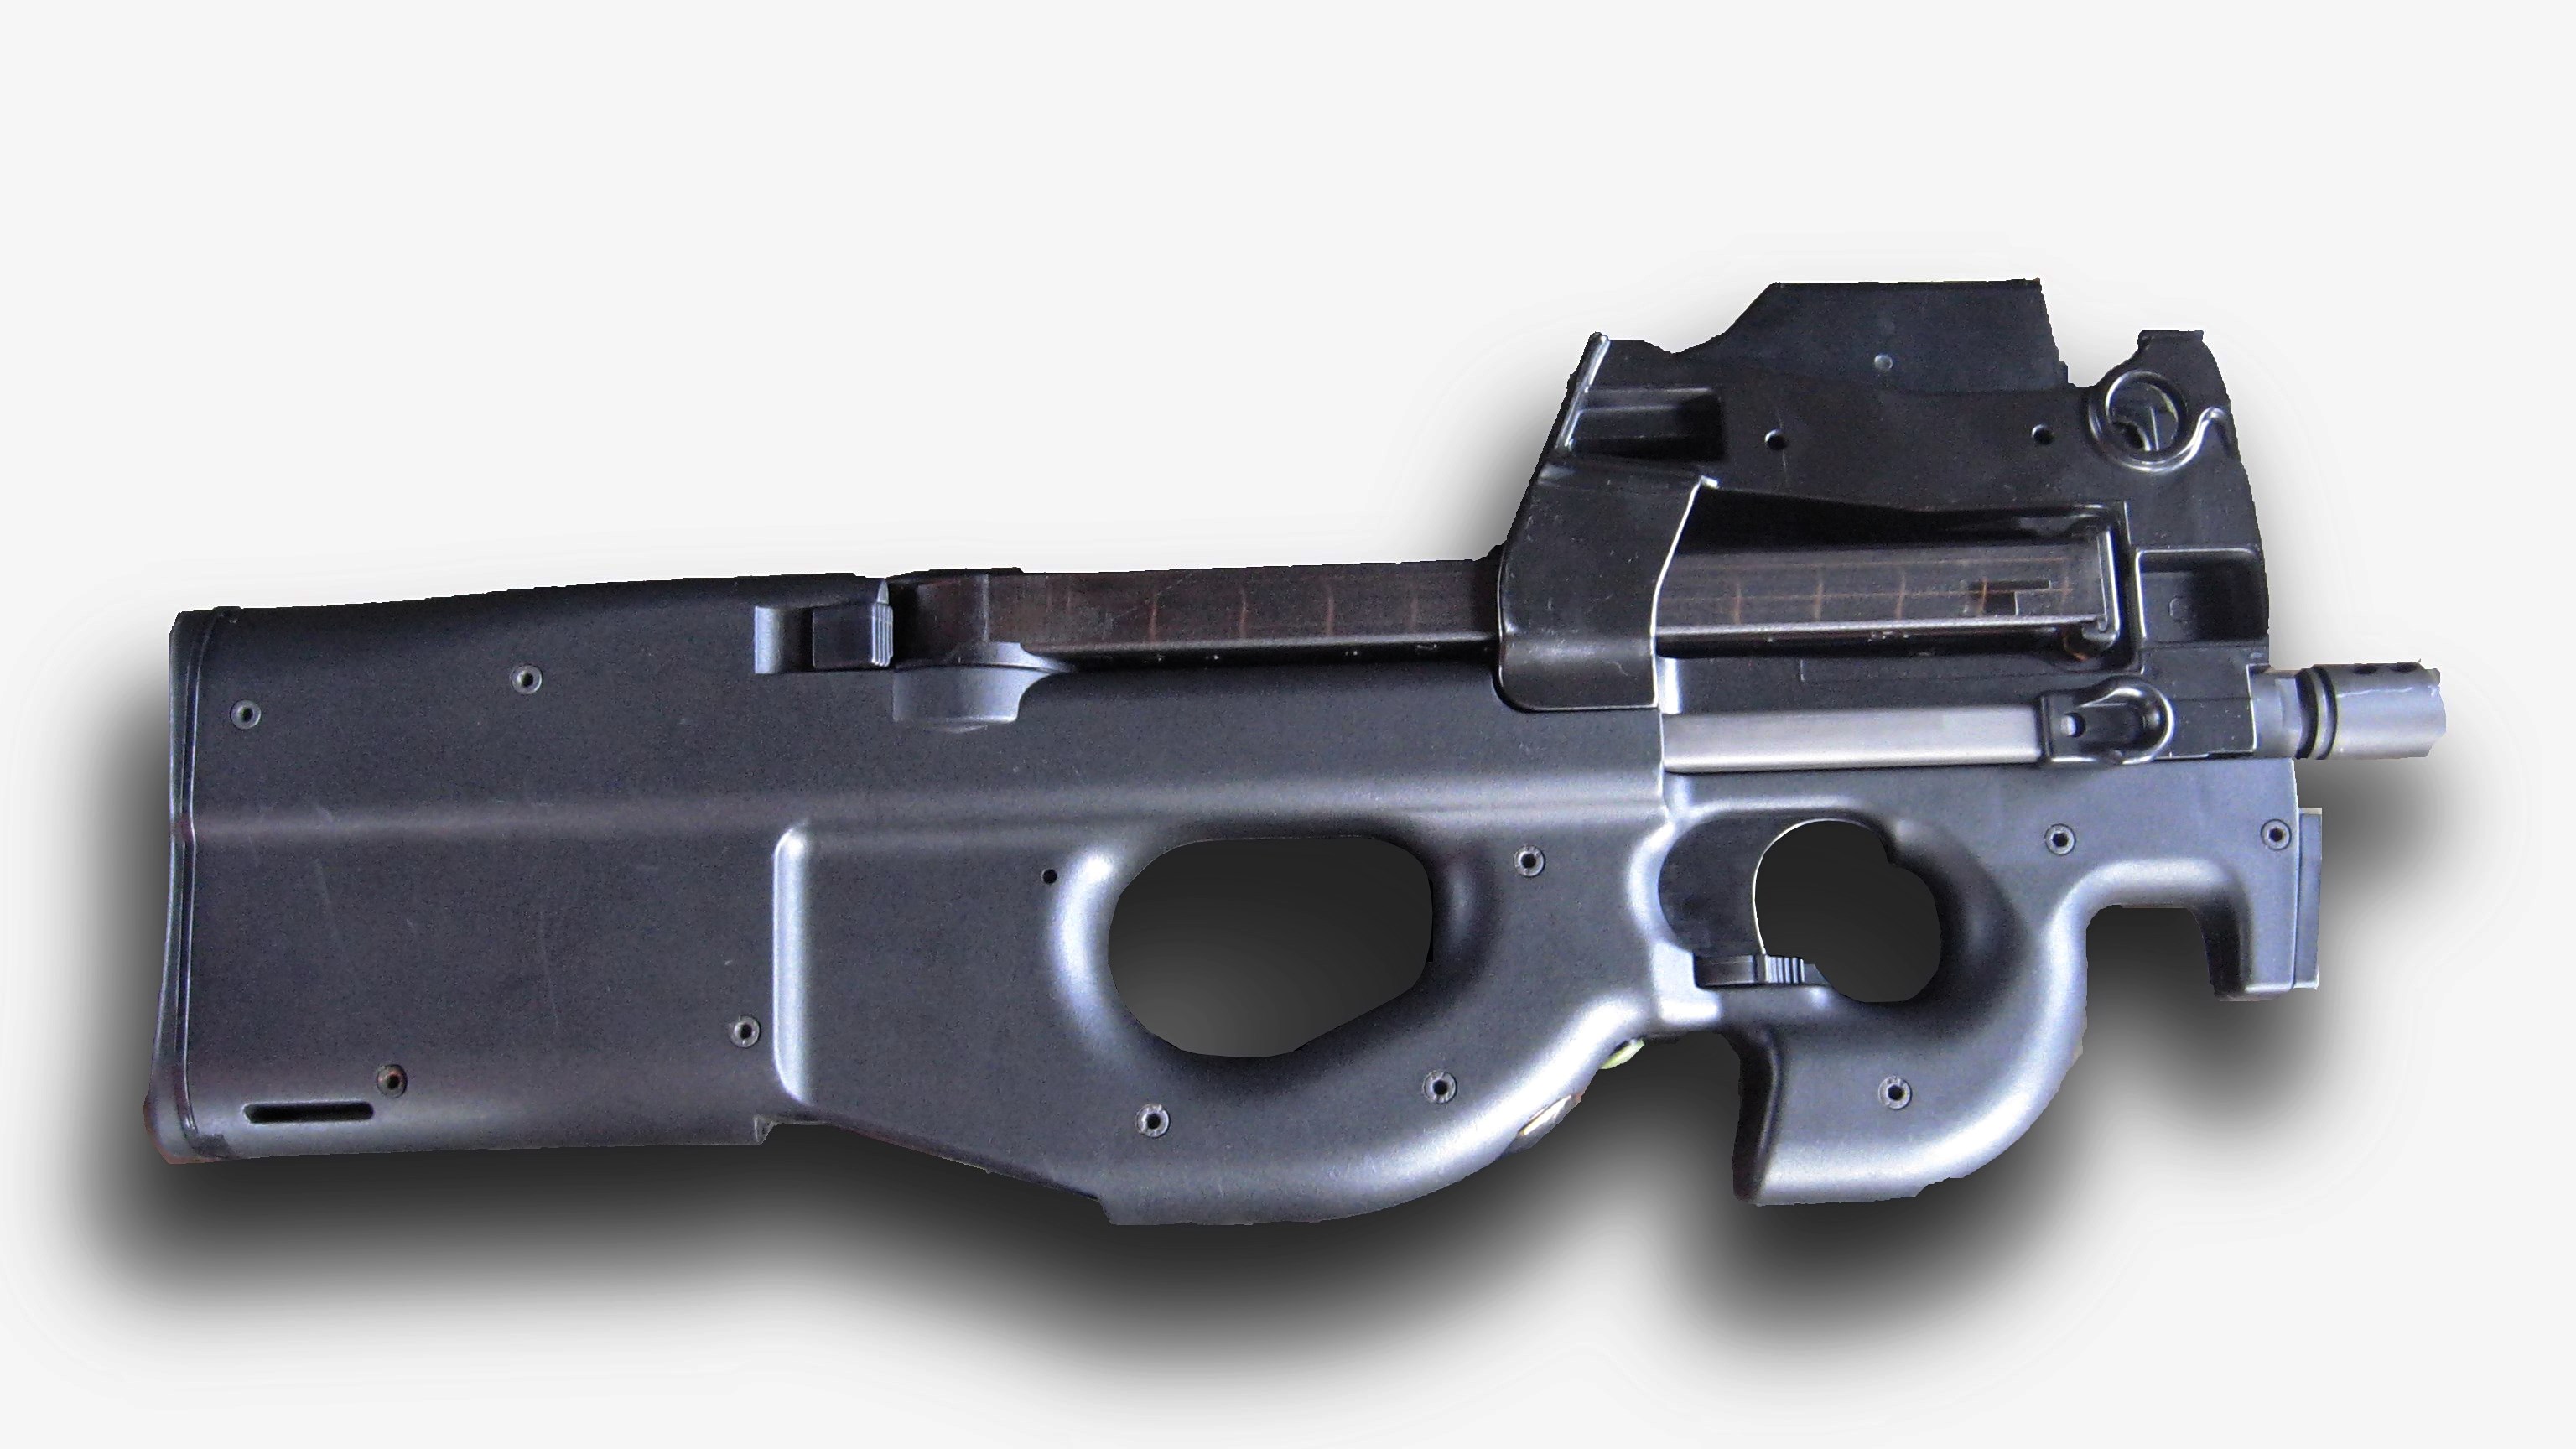 FN P90 Pics, Weapons Collection